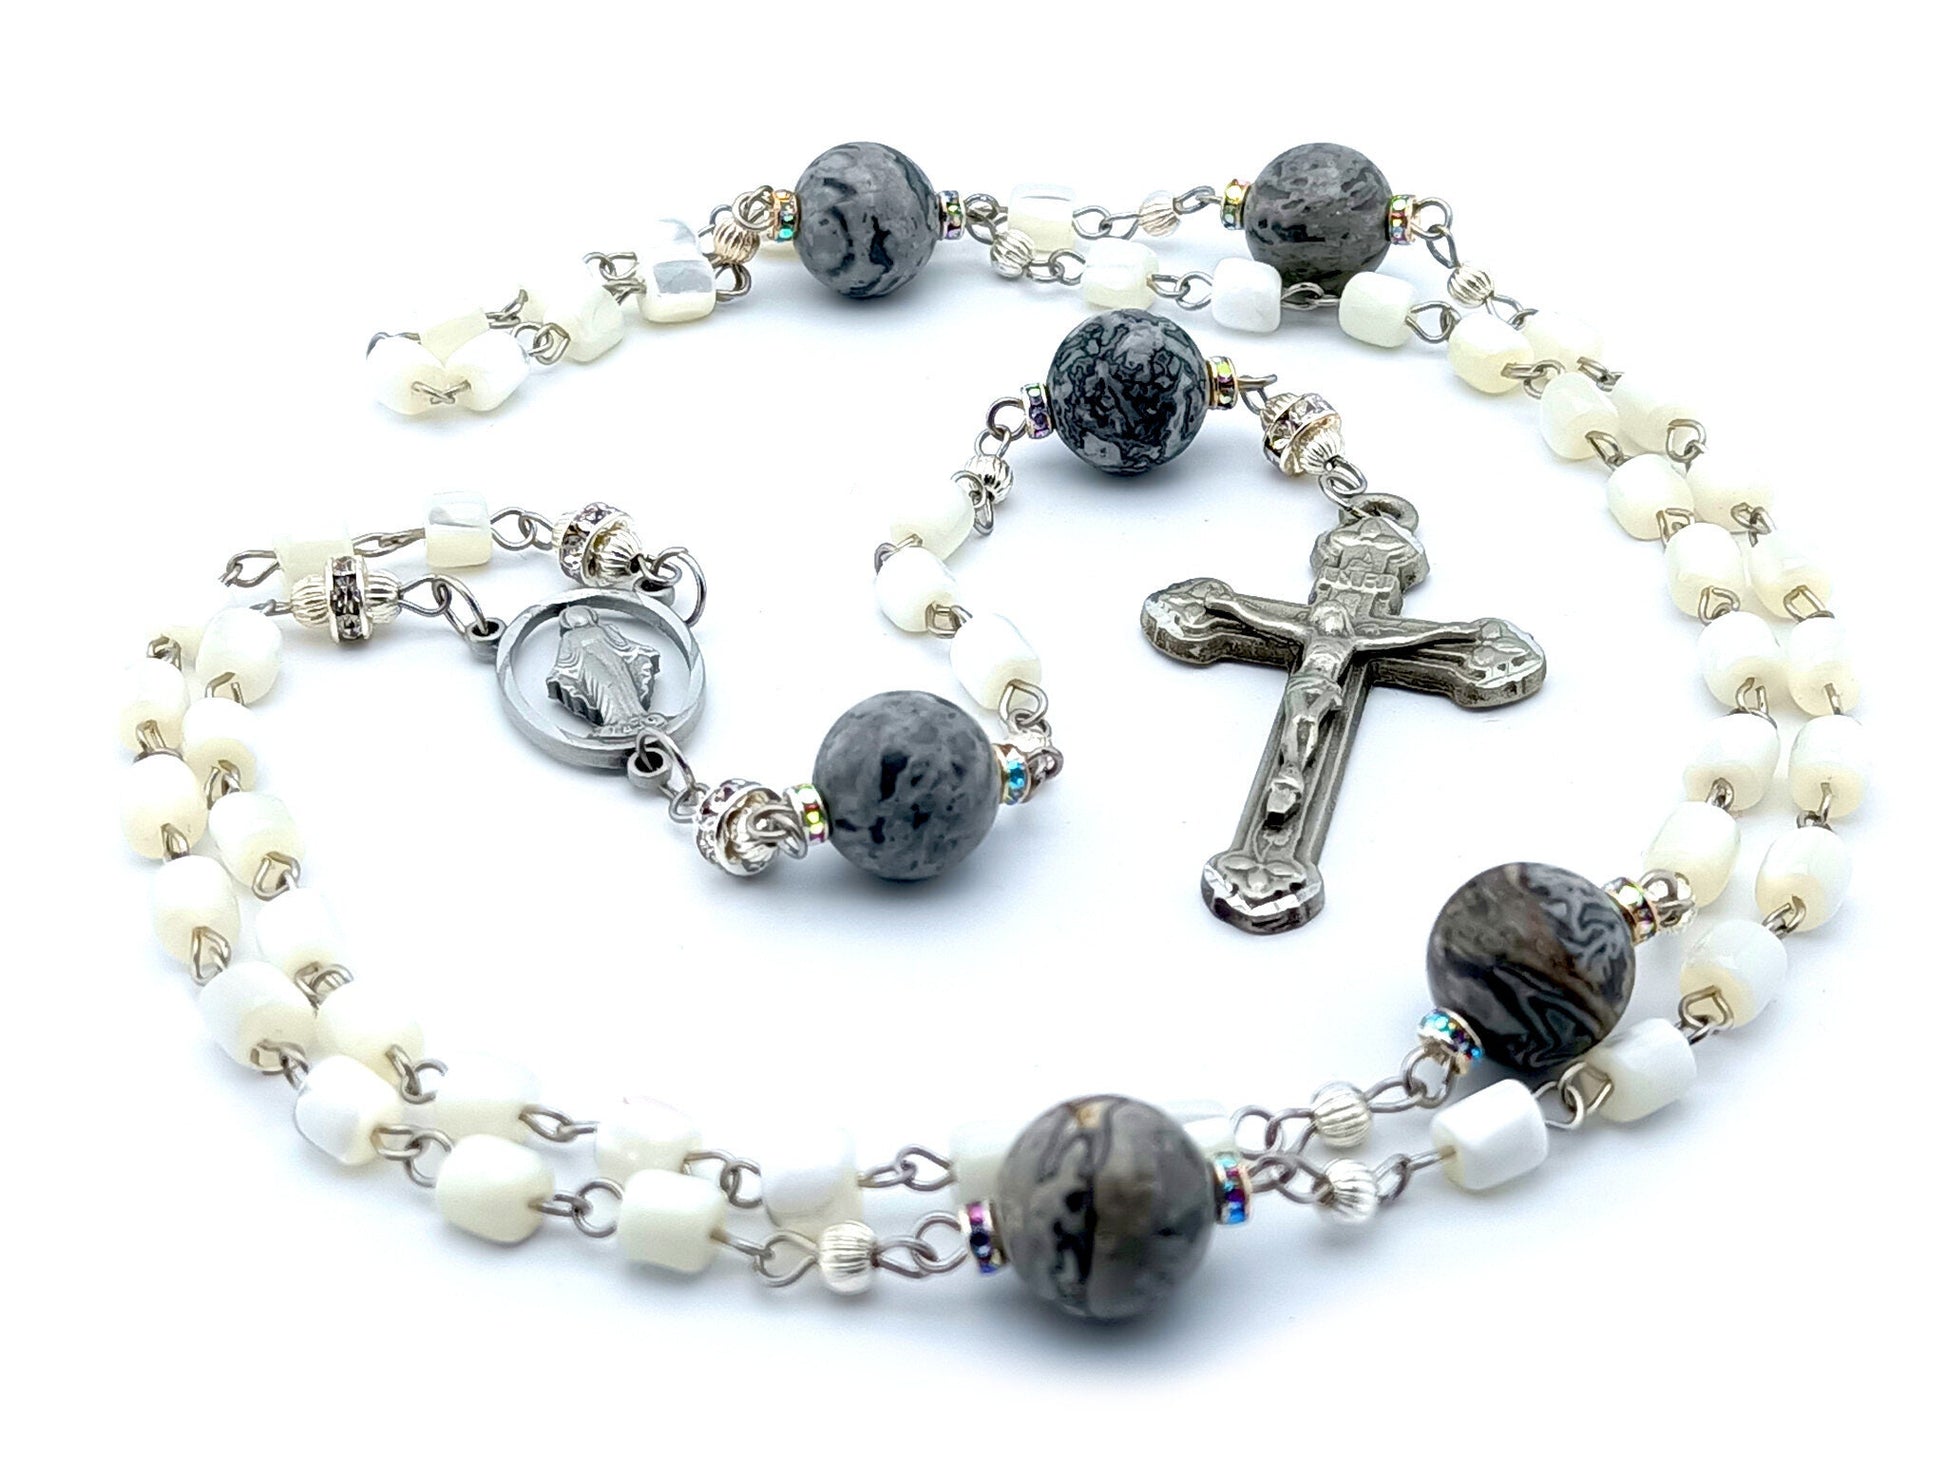 Miraculous Medal unique rosary beads with mother of pearl beads, agate pater beads, pewter centre medal and crucifix.